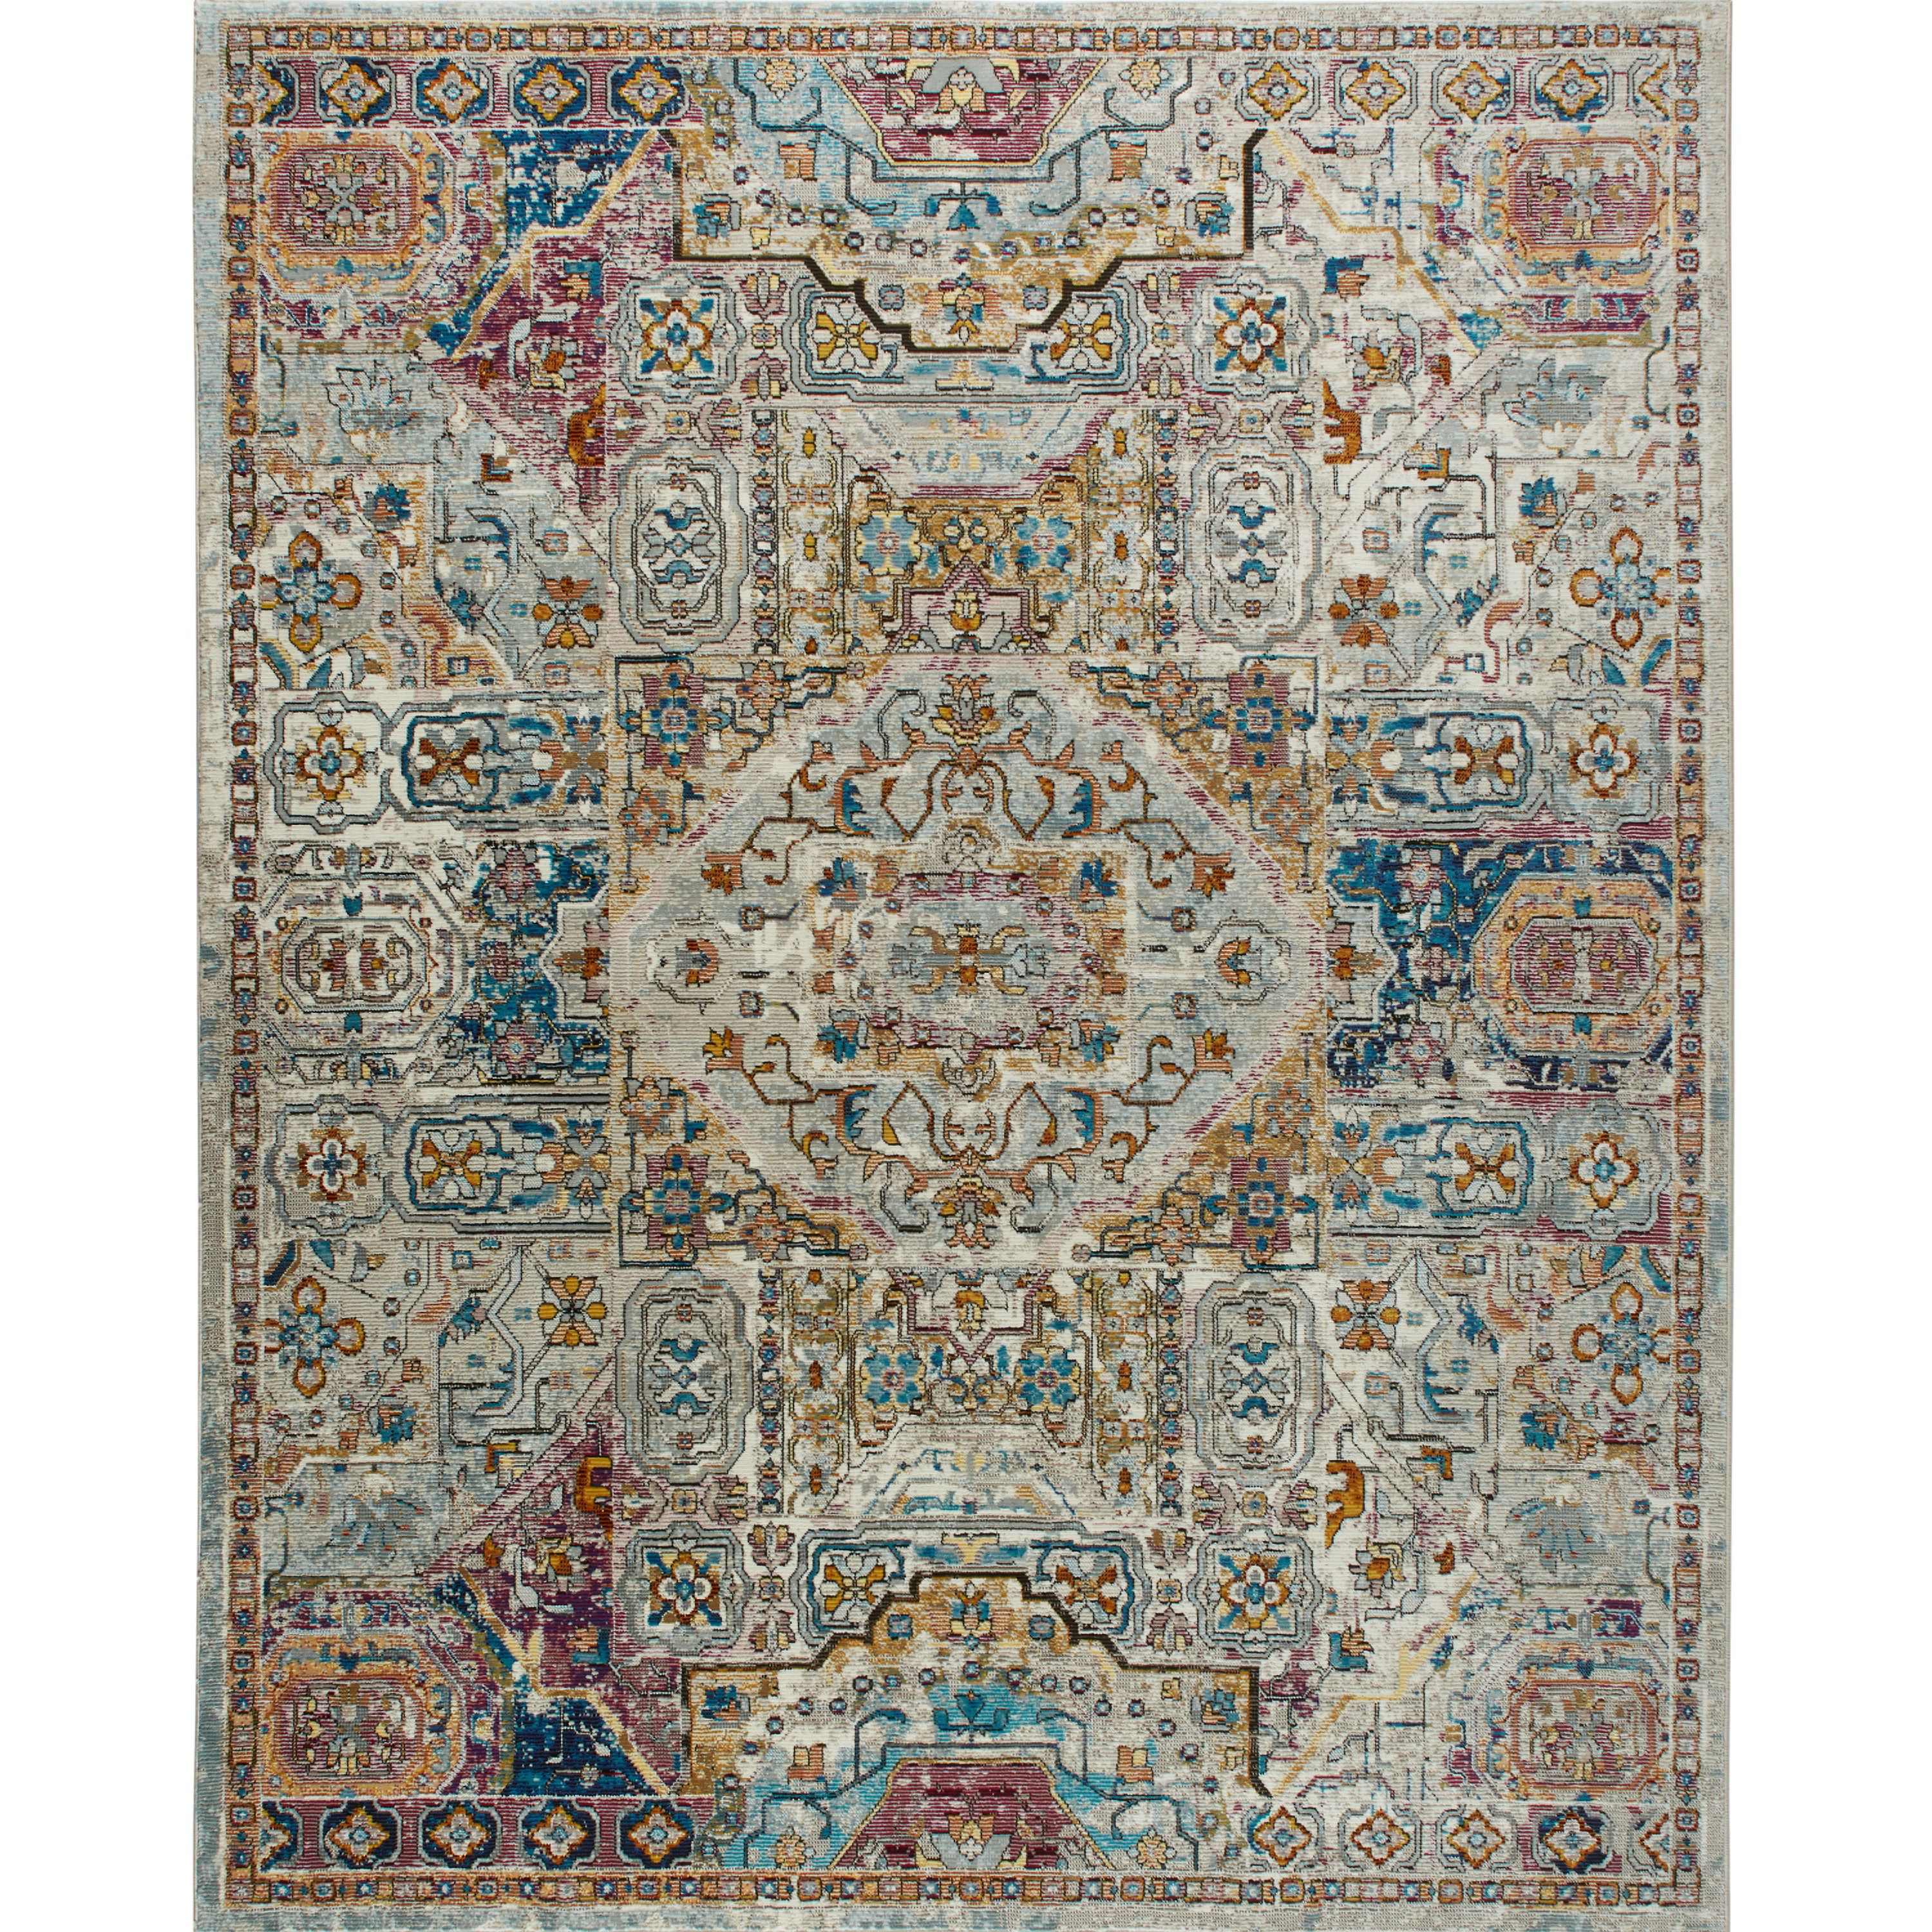 Home Dynamix Nicole Miller Parlin Aster Area Rug 7'9x9'5 Ivory/Rust 